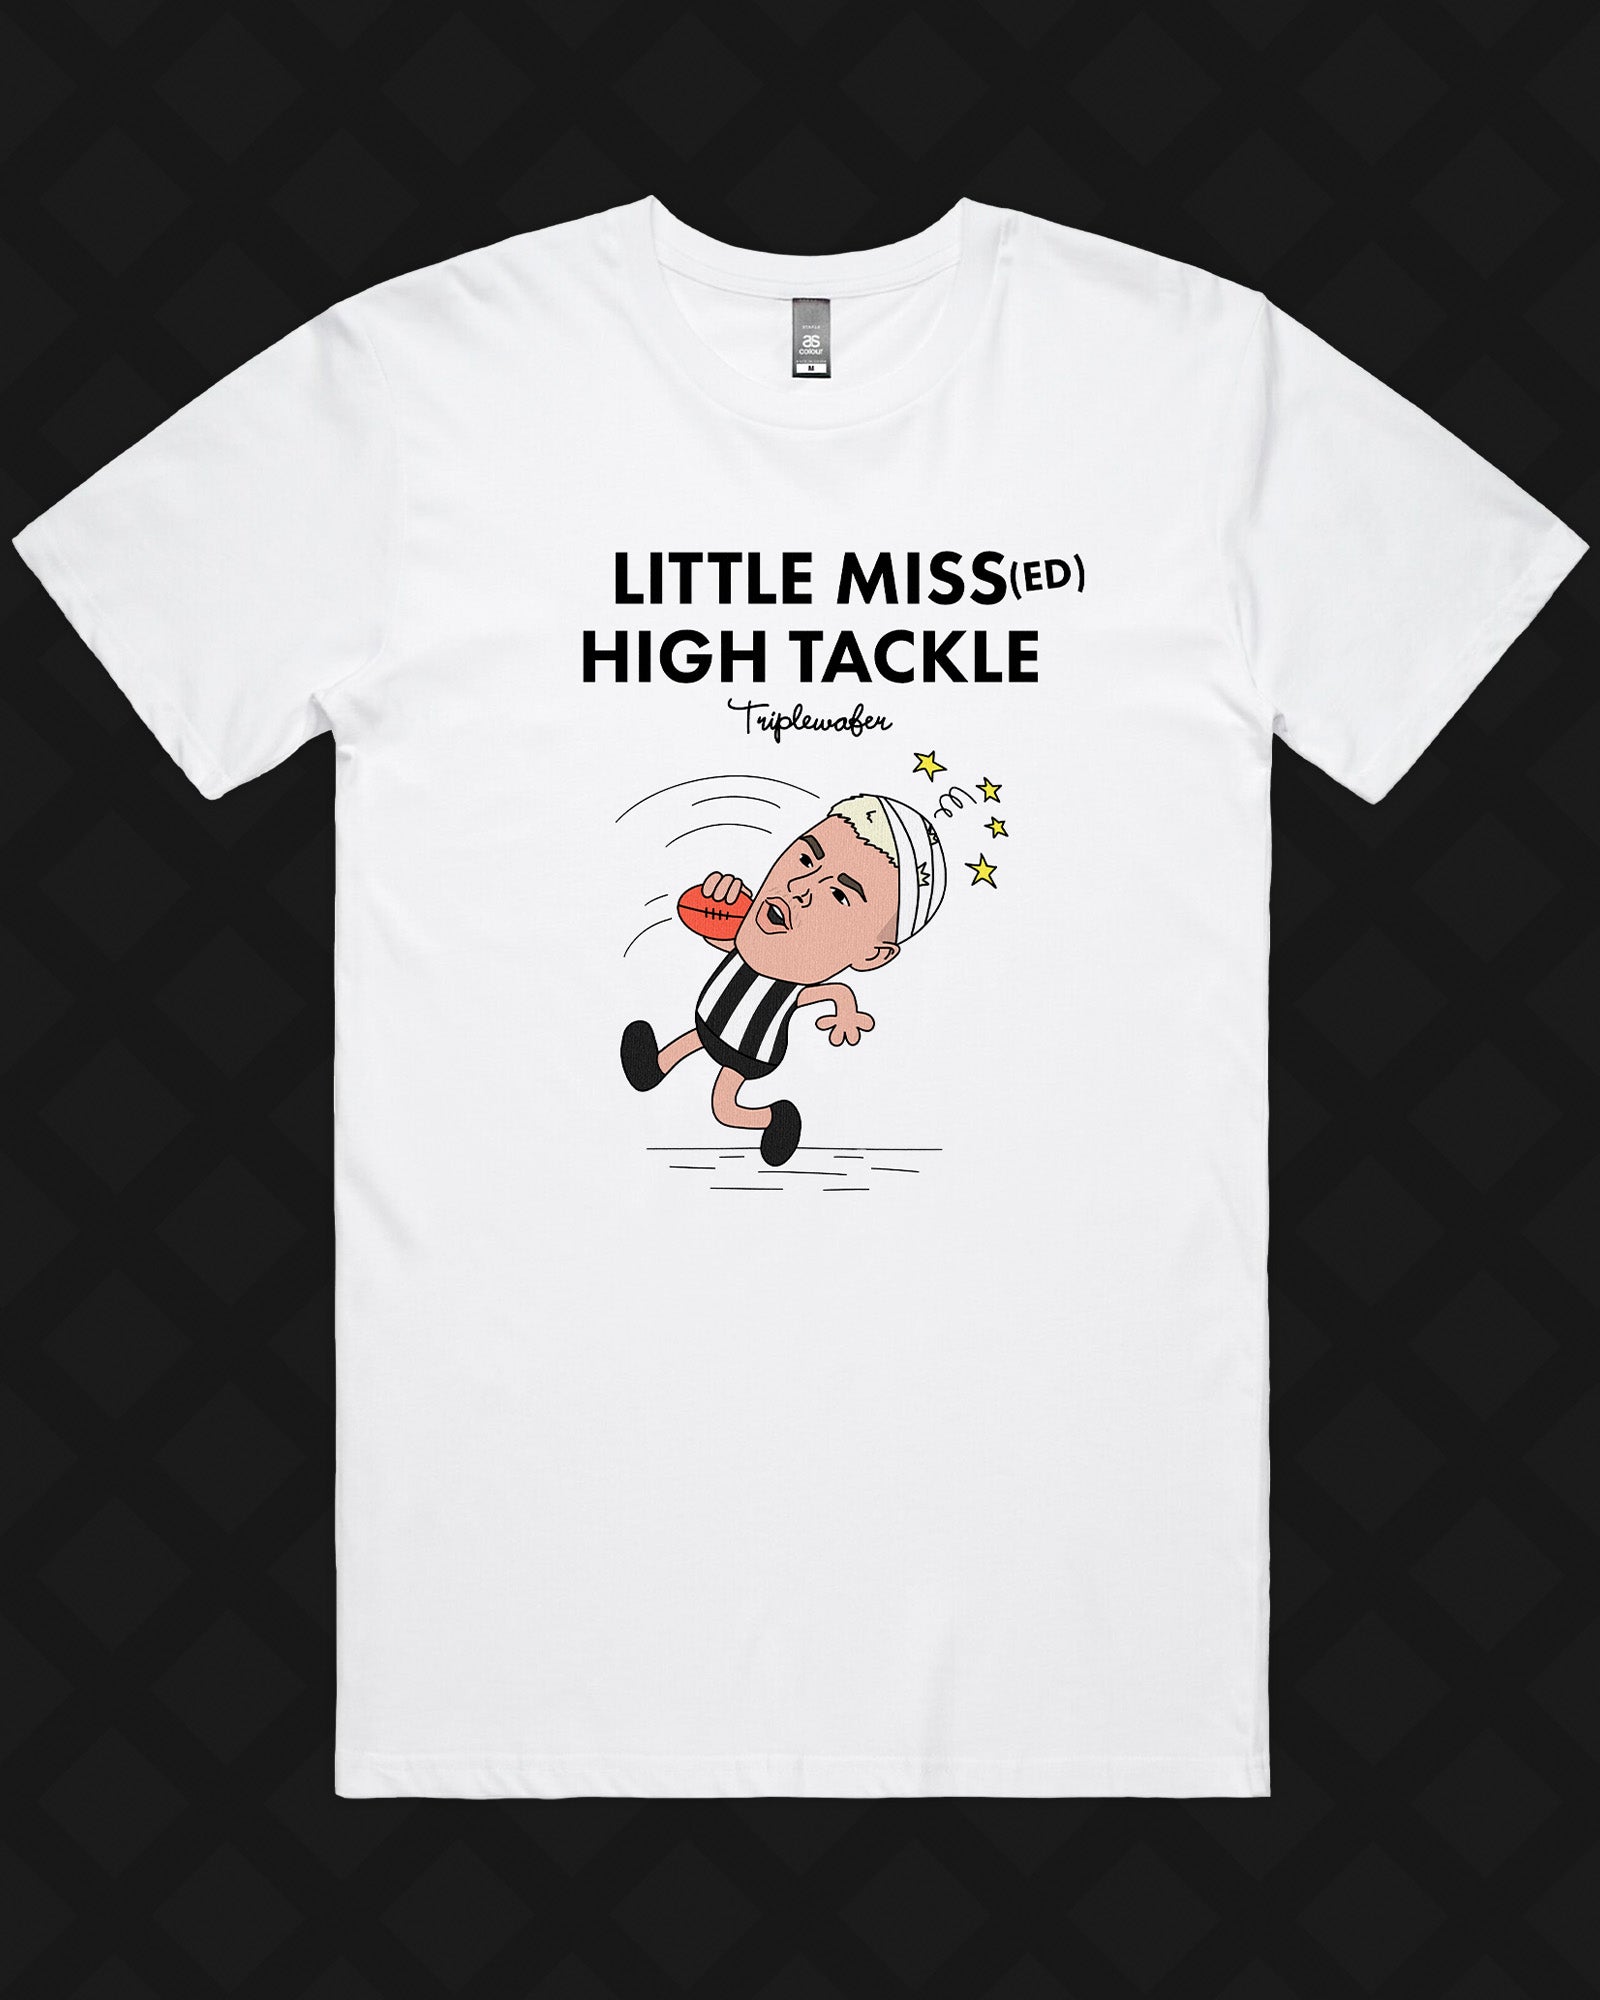 LITTLE MISSED HIGH TACKLE TEE